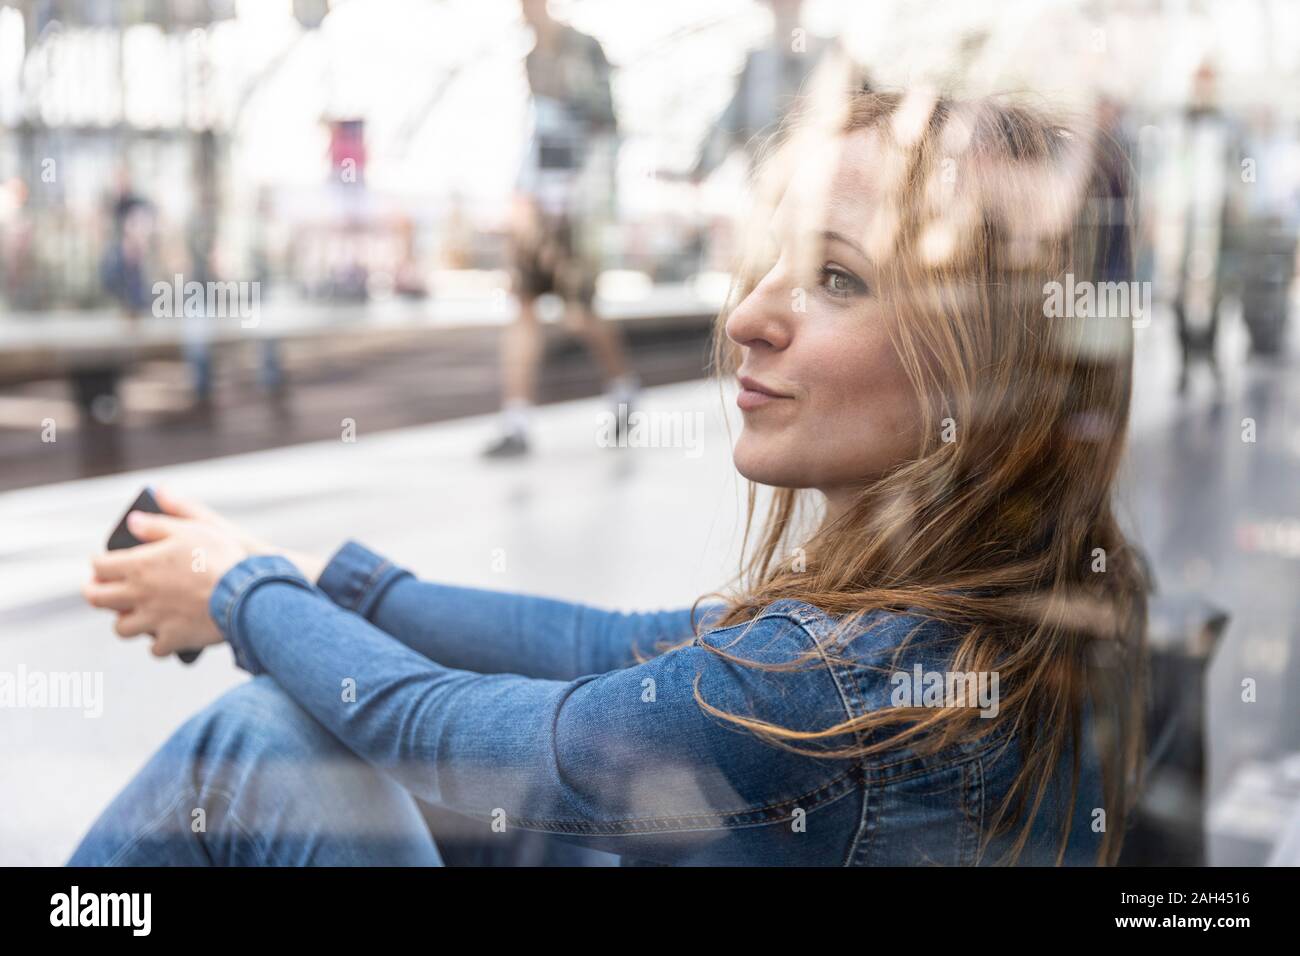 Woman waiting at the train station, Berlin, Germany Stock Photo